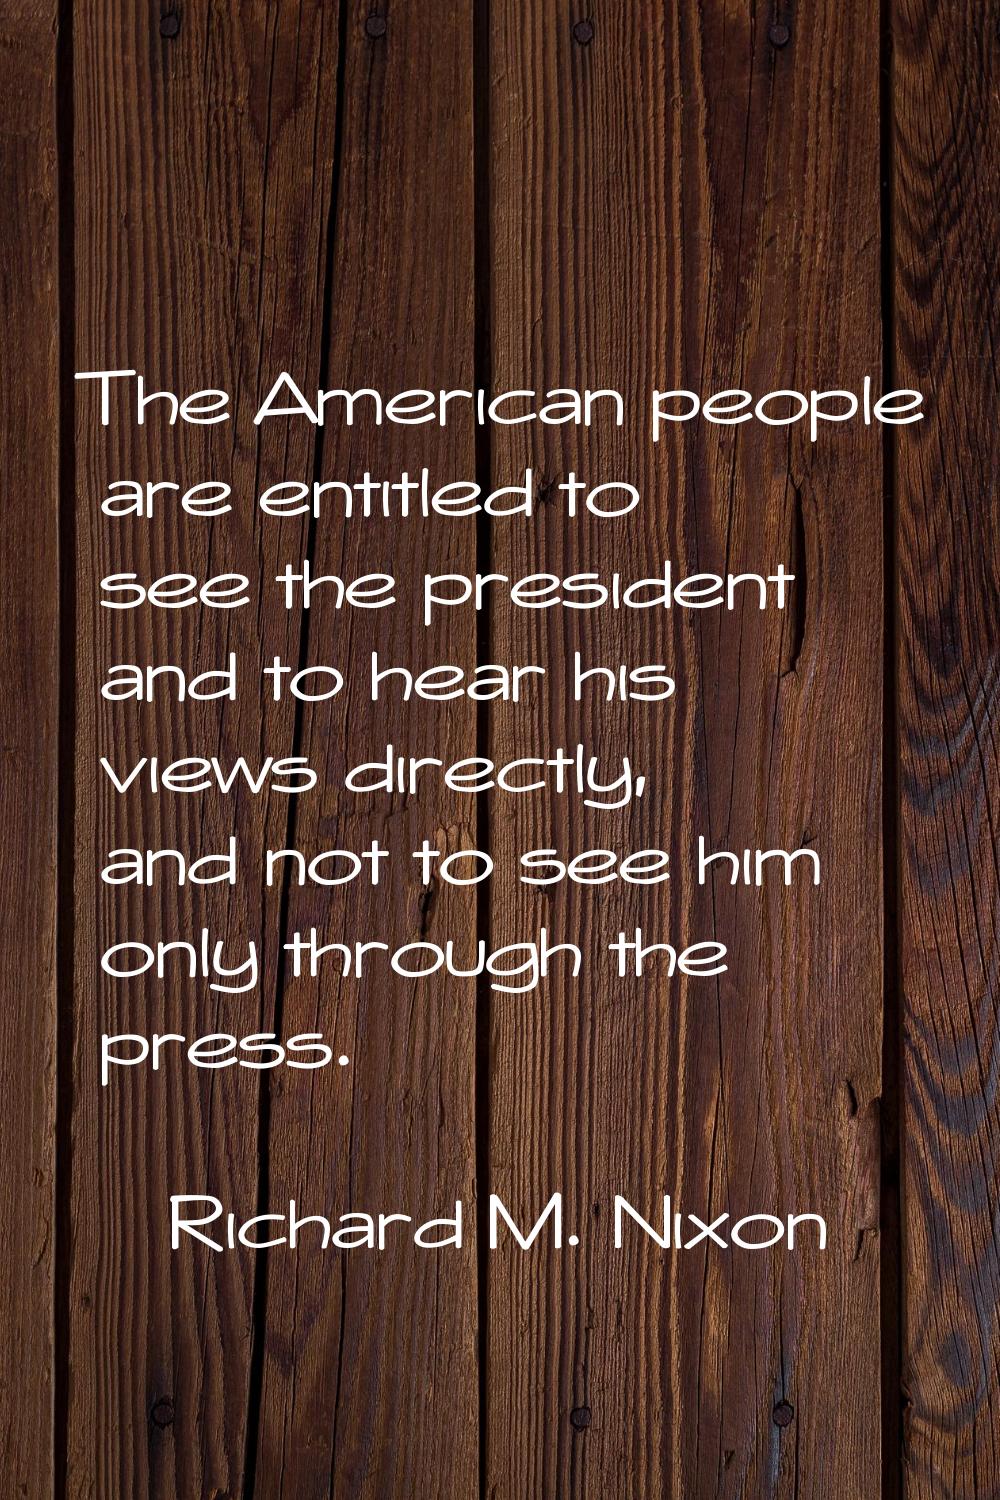 The American people are entitled to see the president and to hear his views directly, and not to se